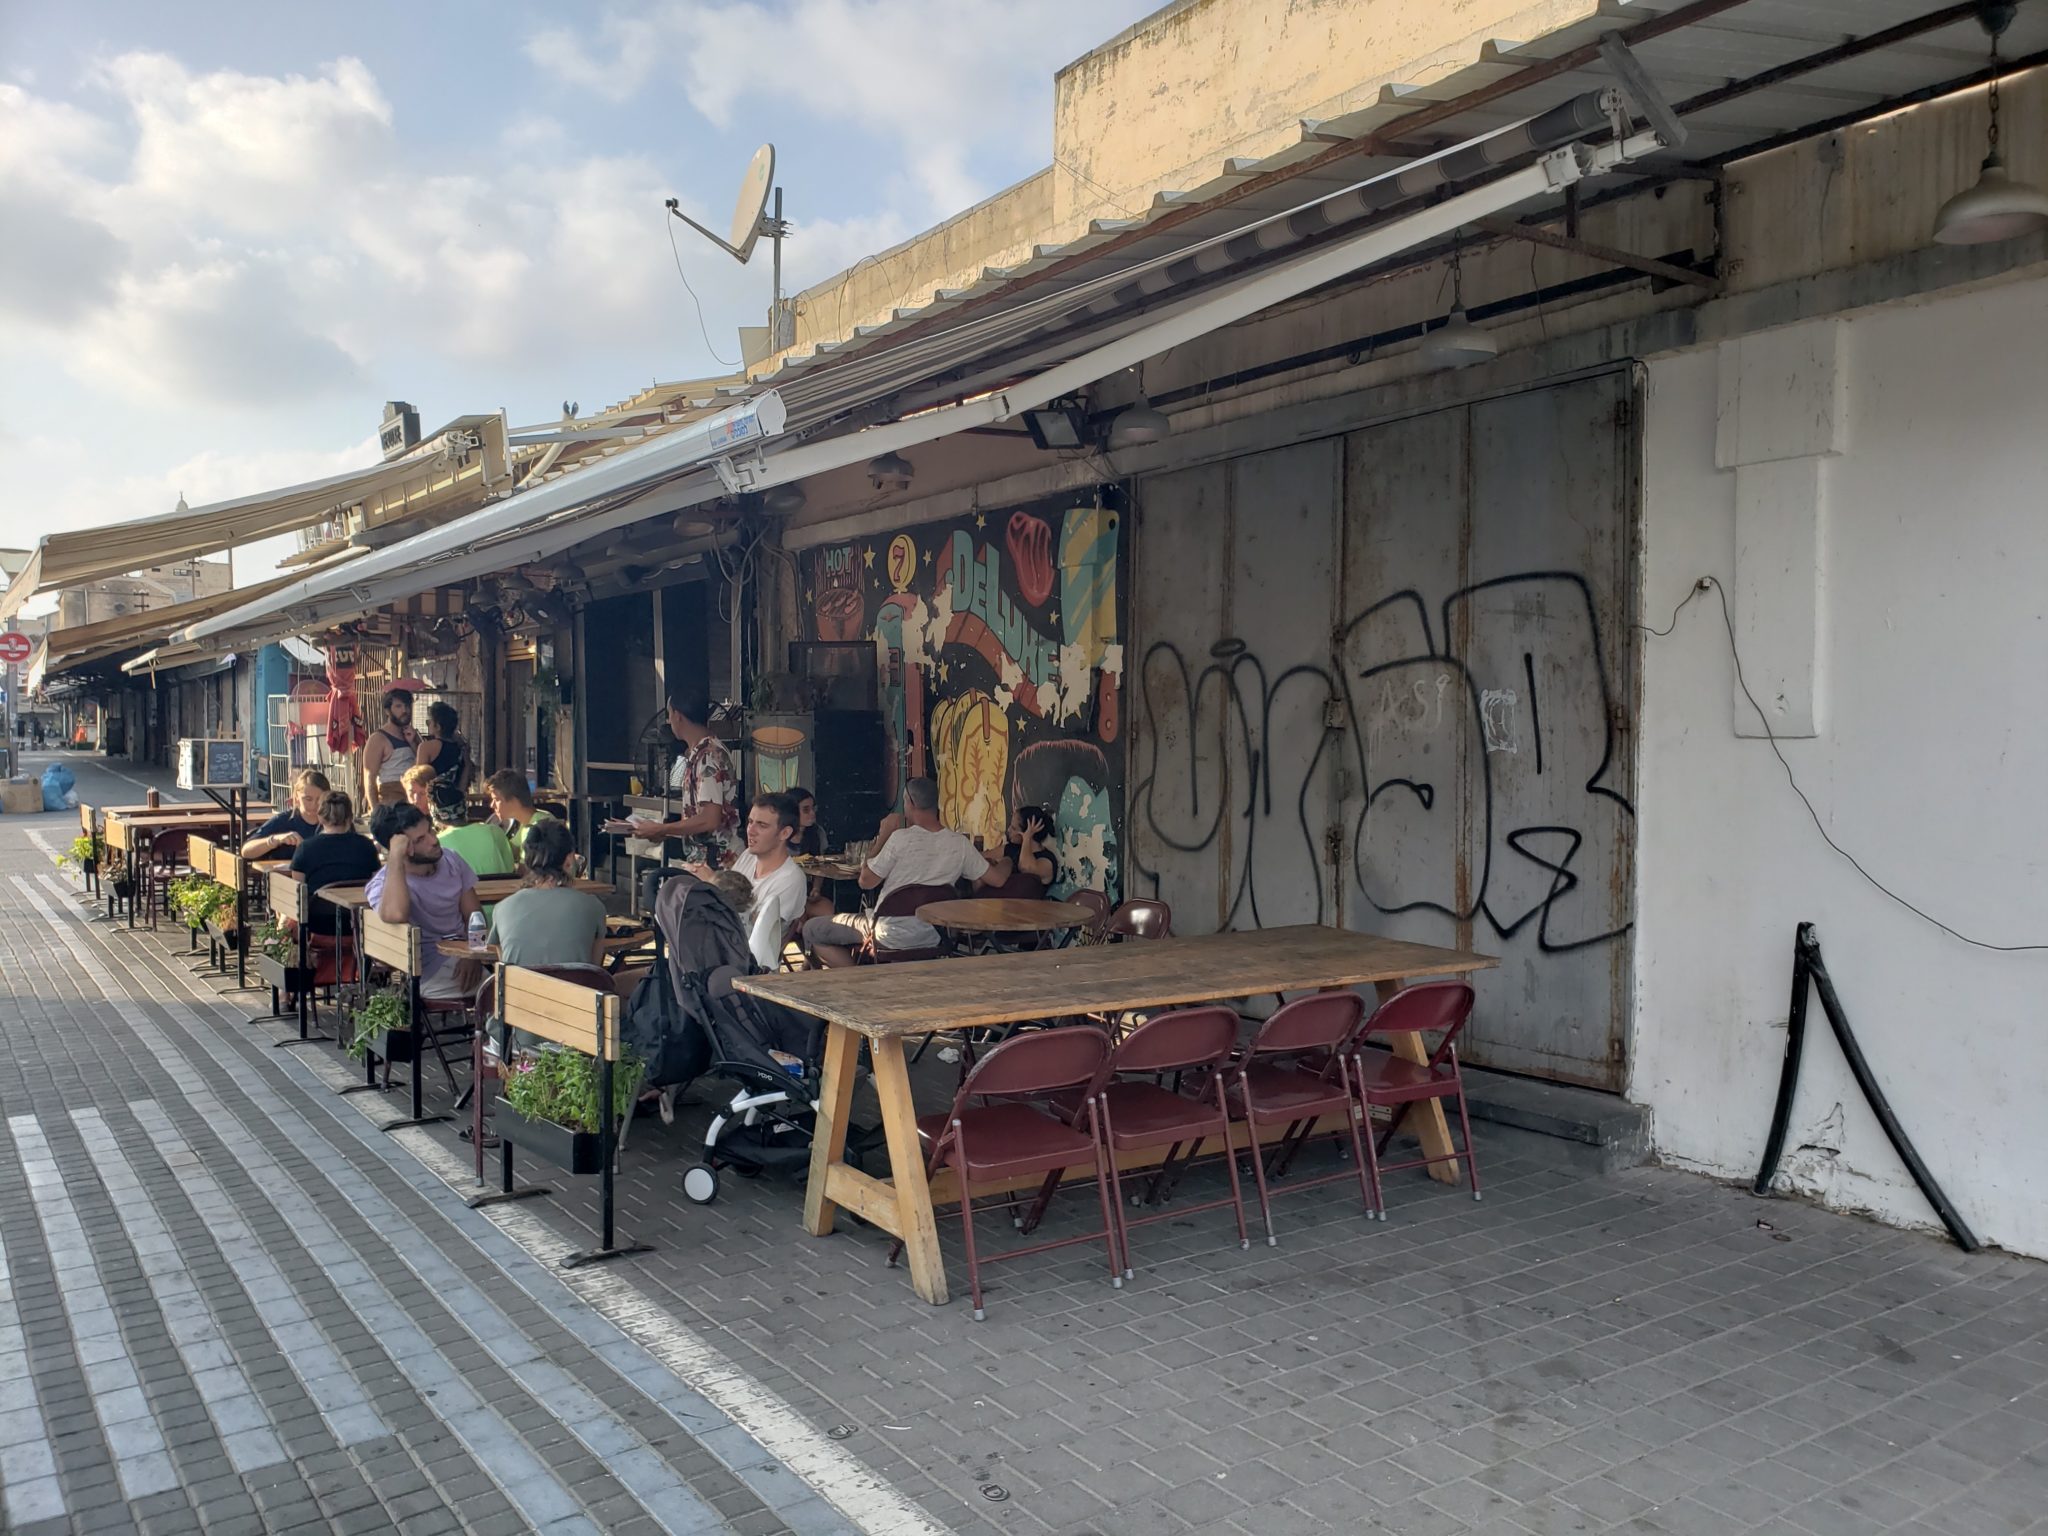 a group of people sitting at tables outside a building